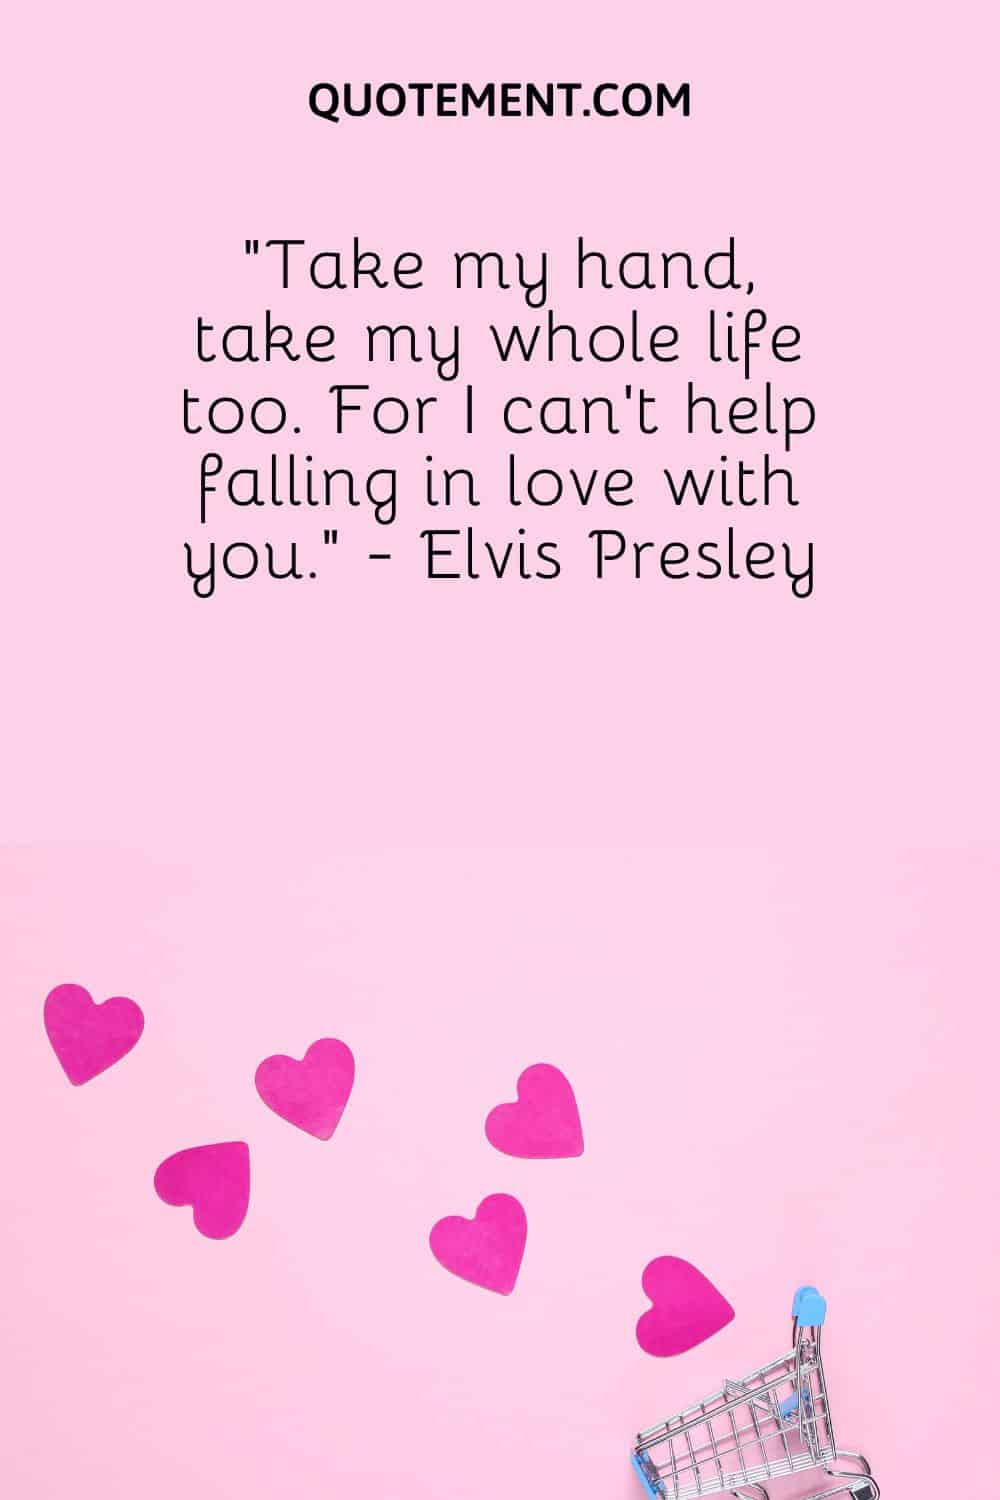 “Take my hand, take my whole life too. For I can’t help falling in love with you.” - Elvis Presley